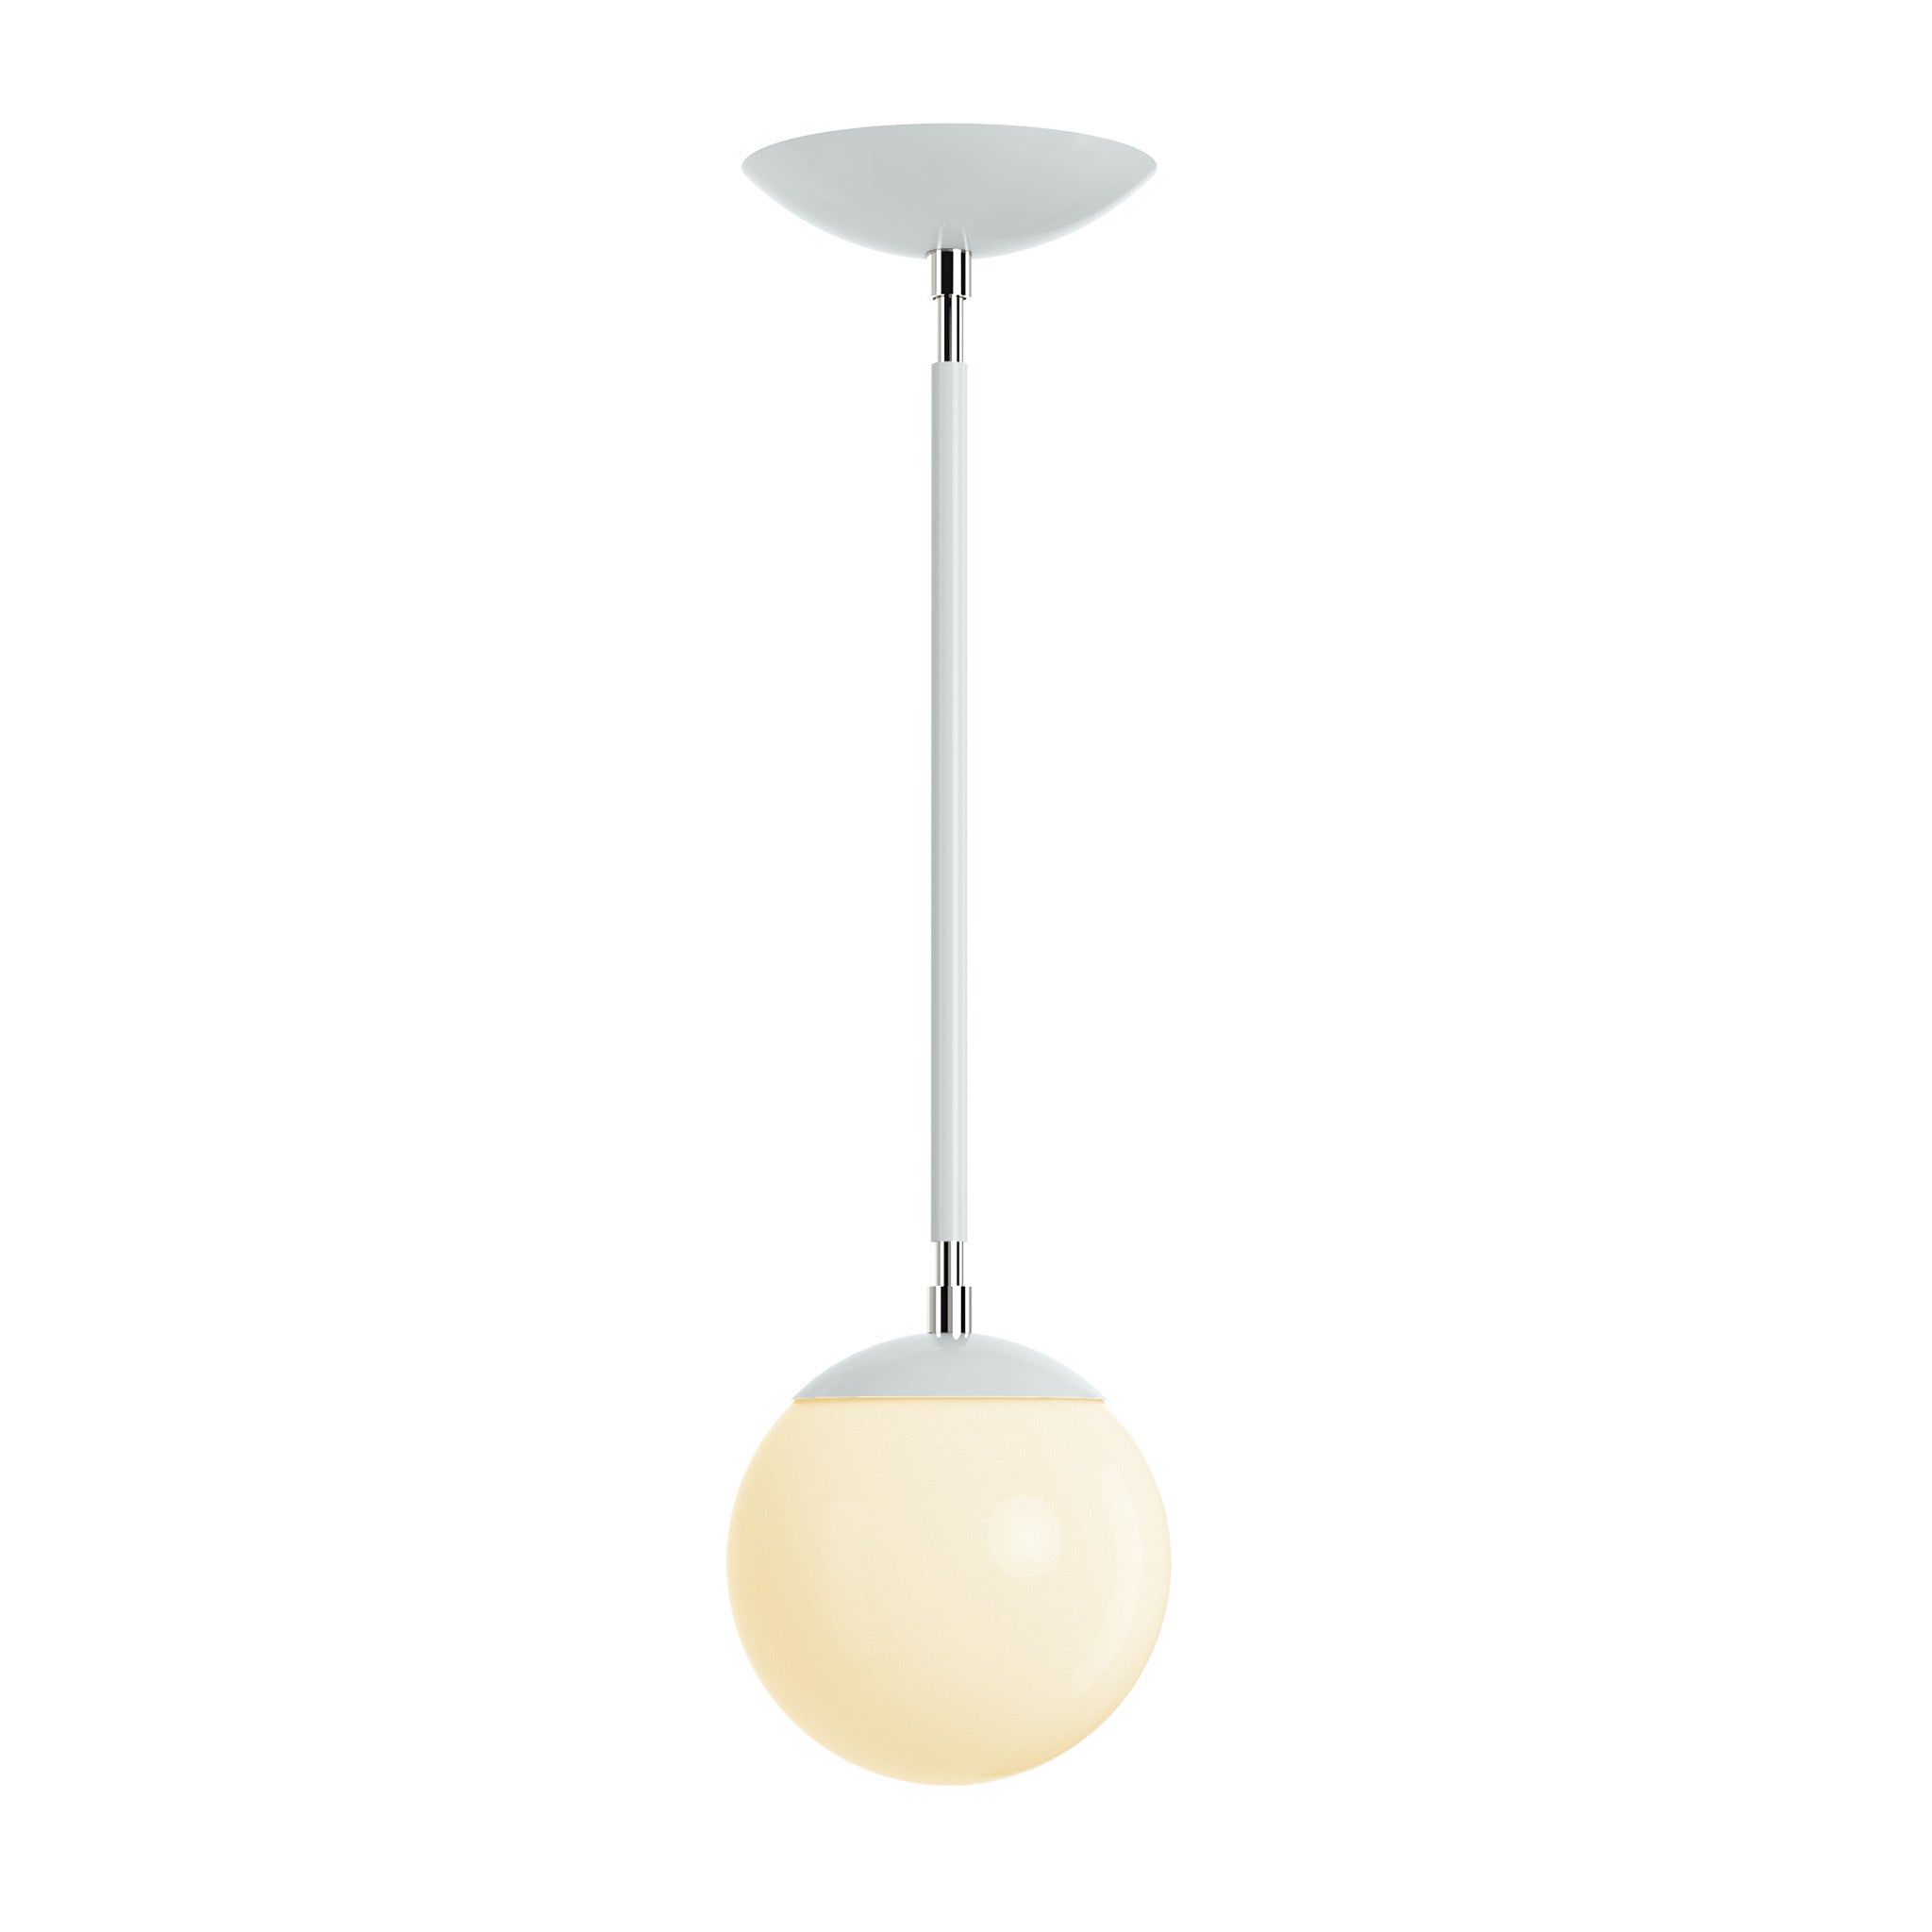 Polished Nickel and chalk cap globe pendant 6" Dutton Brown lighting